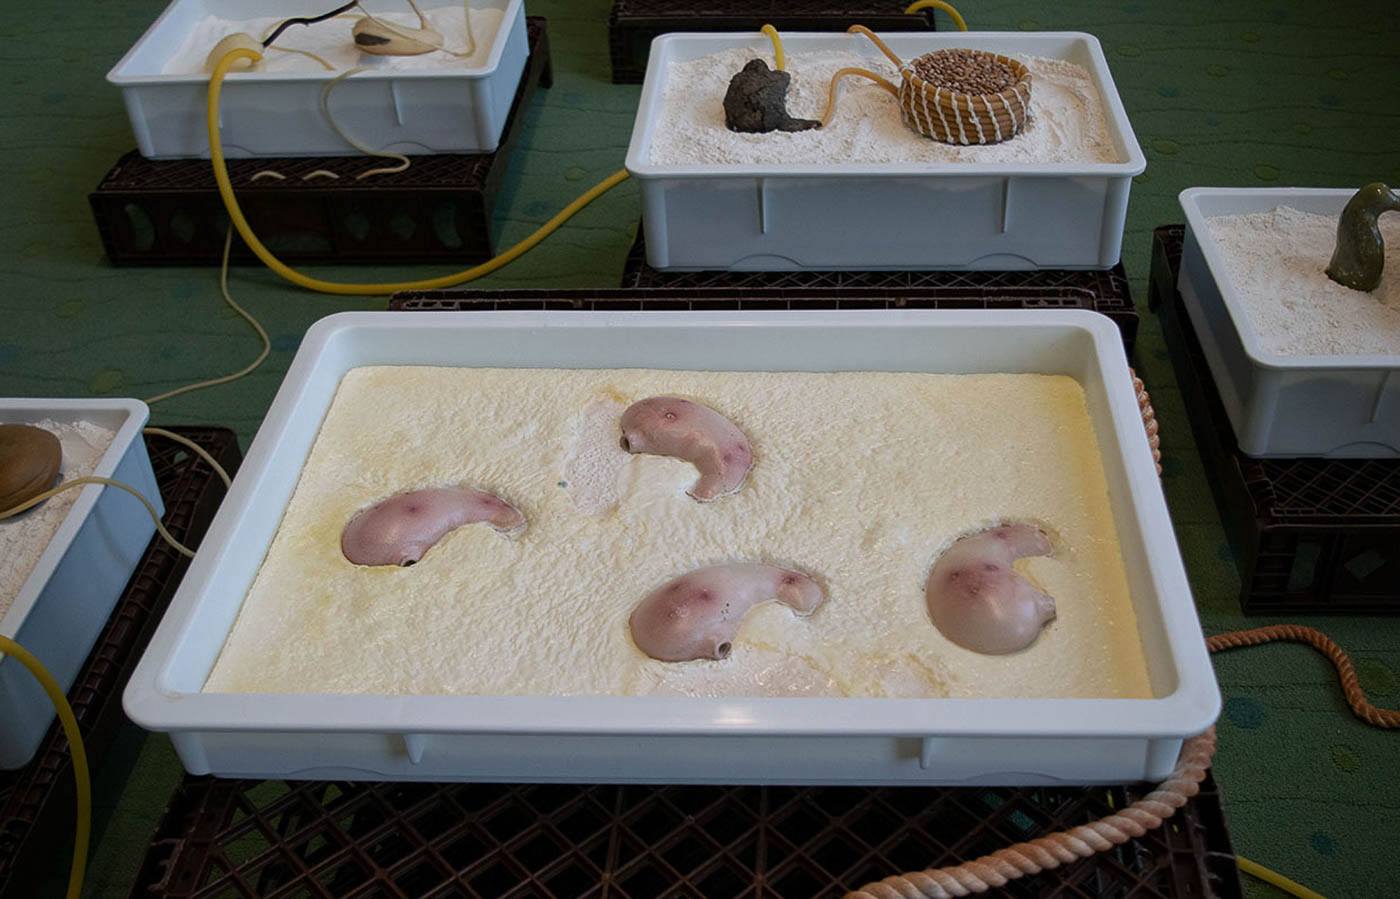 several identical sculptures submerged in a white substance in a tray